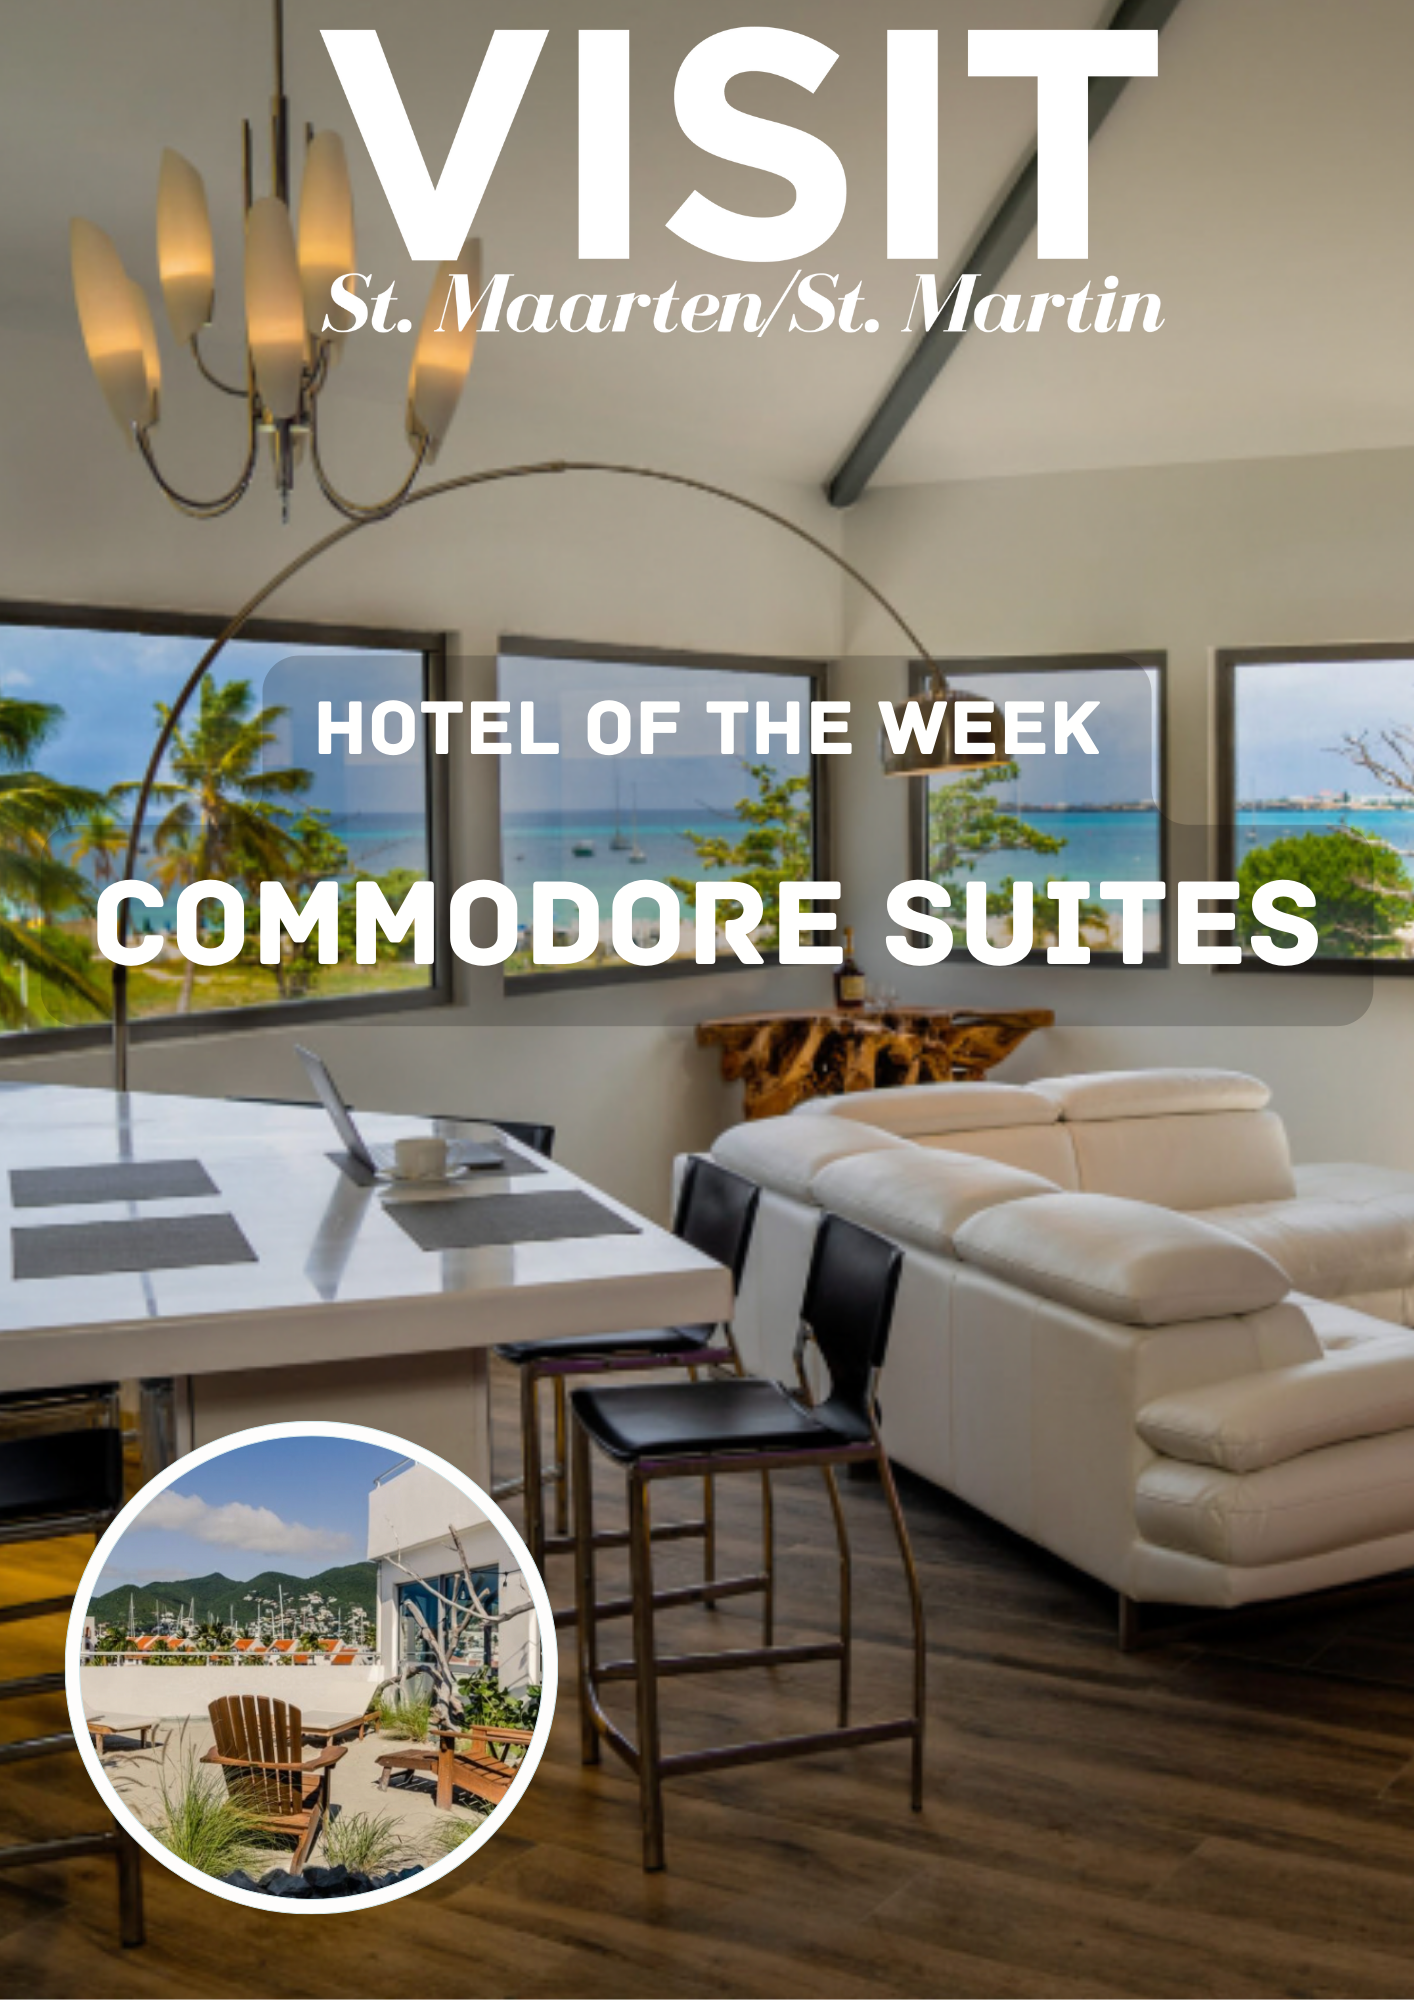 Commodore suites Simpson Bay is the St Maarten hotel of the week